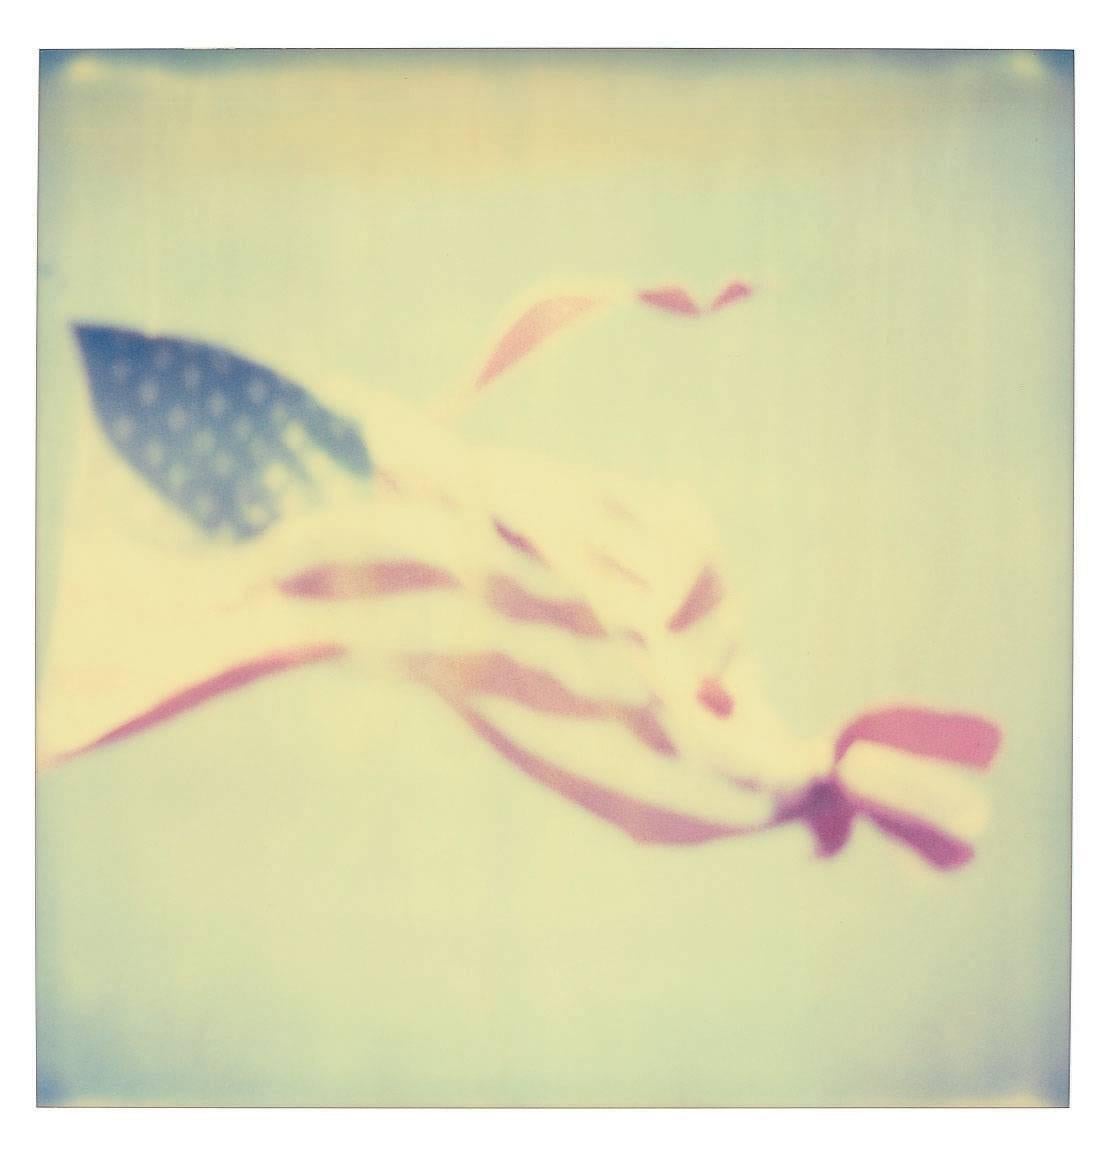 Primary Colors - Contemporary, Figurative, Icons, Polaroid, Photograph, expired 6